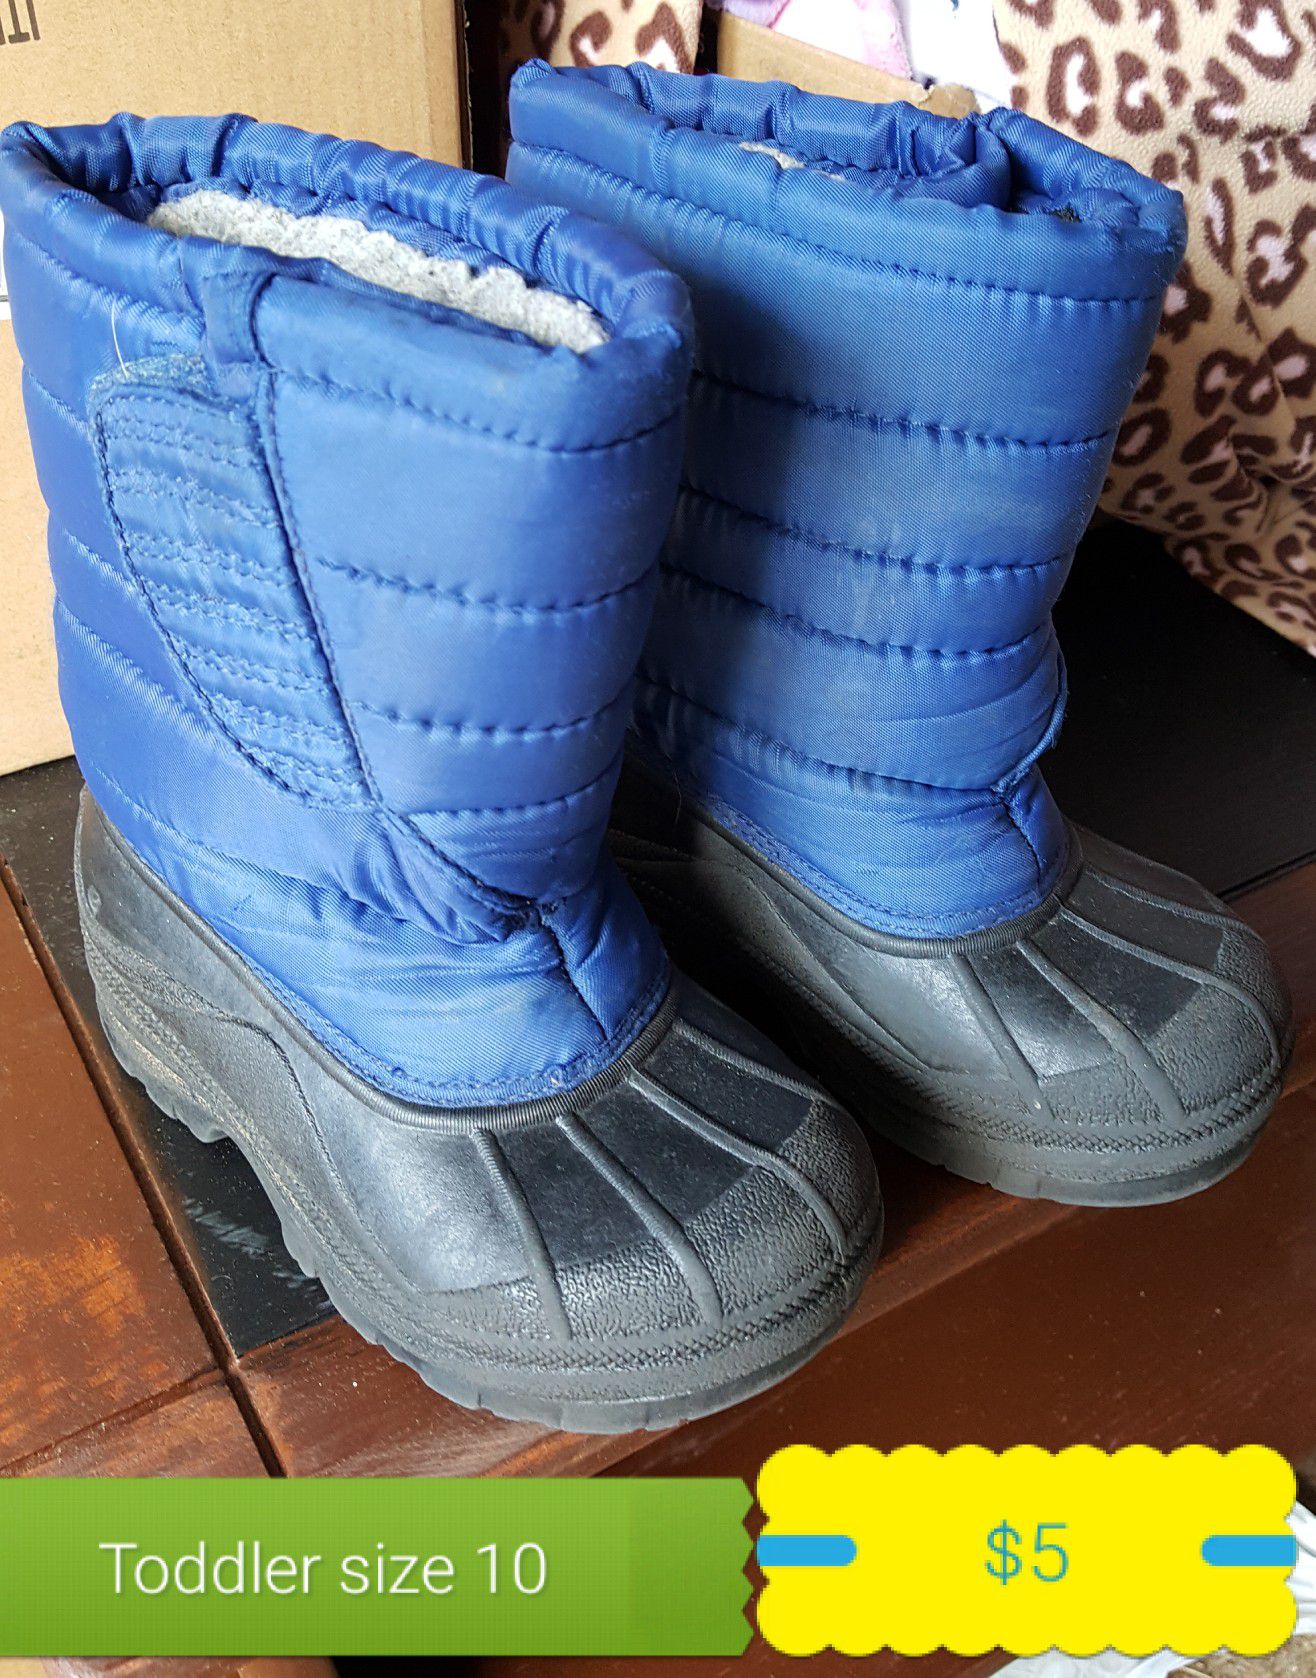 Toddler size 10 winter snow boots